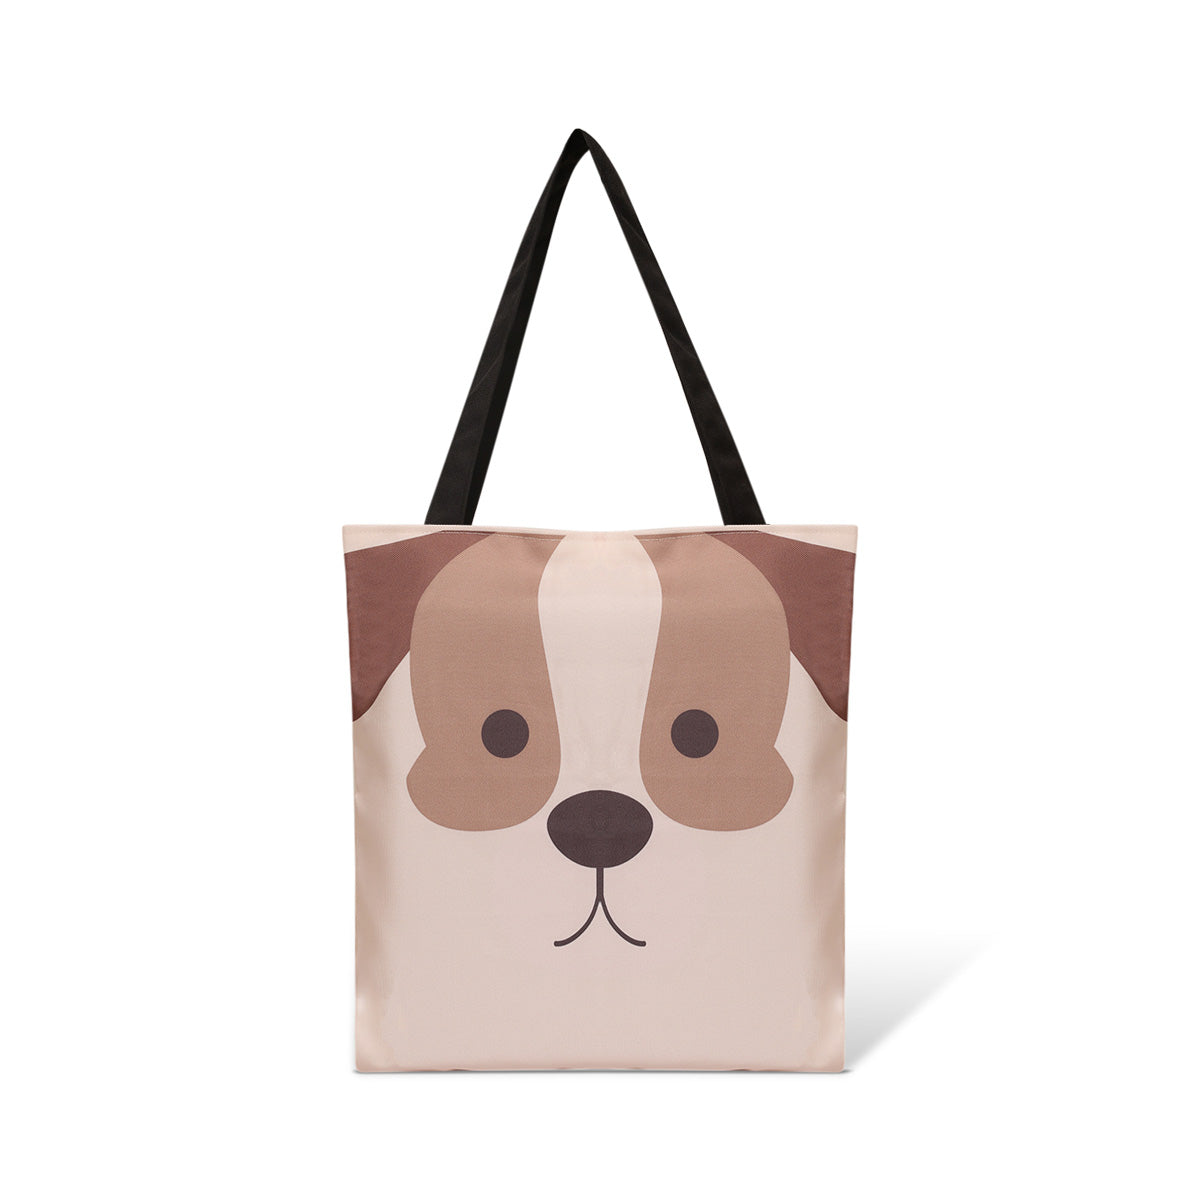 Dog-themed tote bag, ideal for carrying essentials with a fun twist.